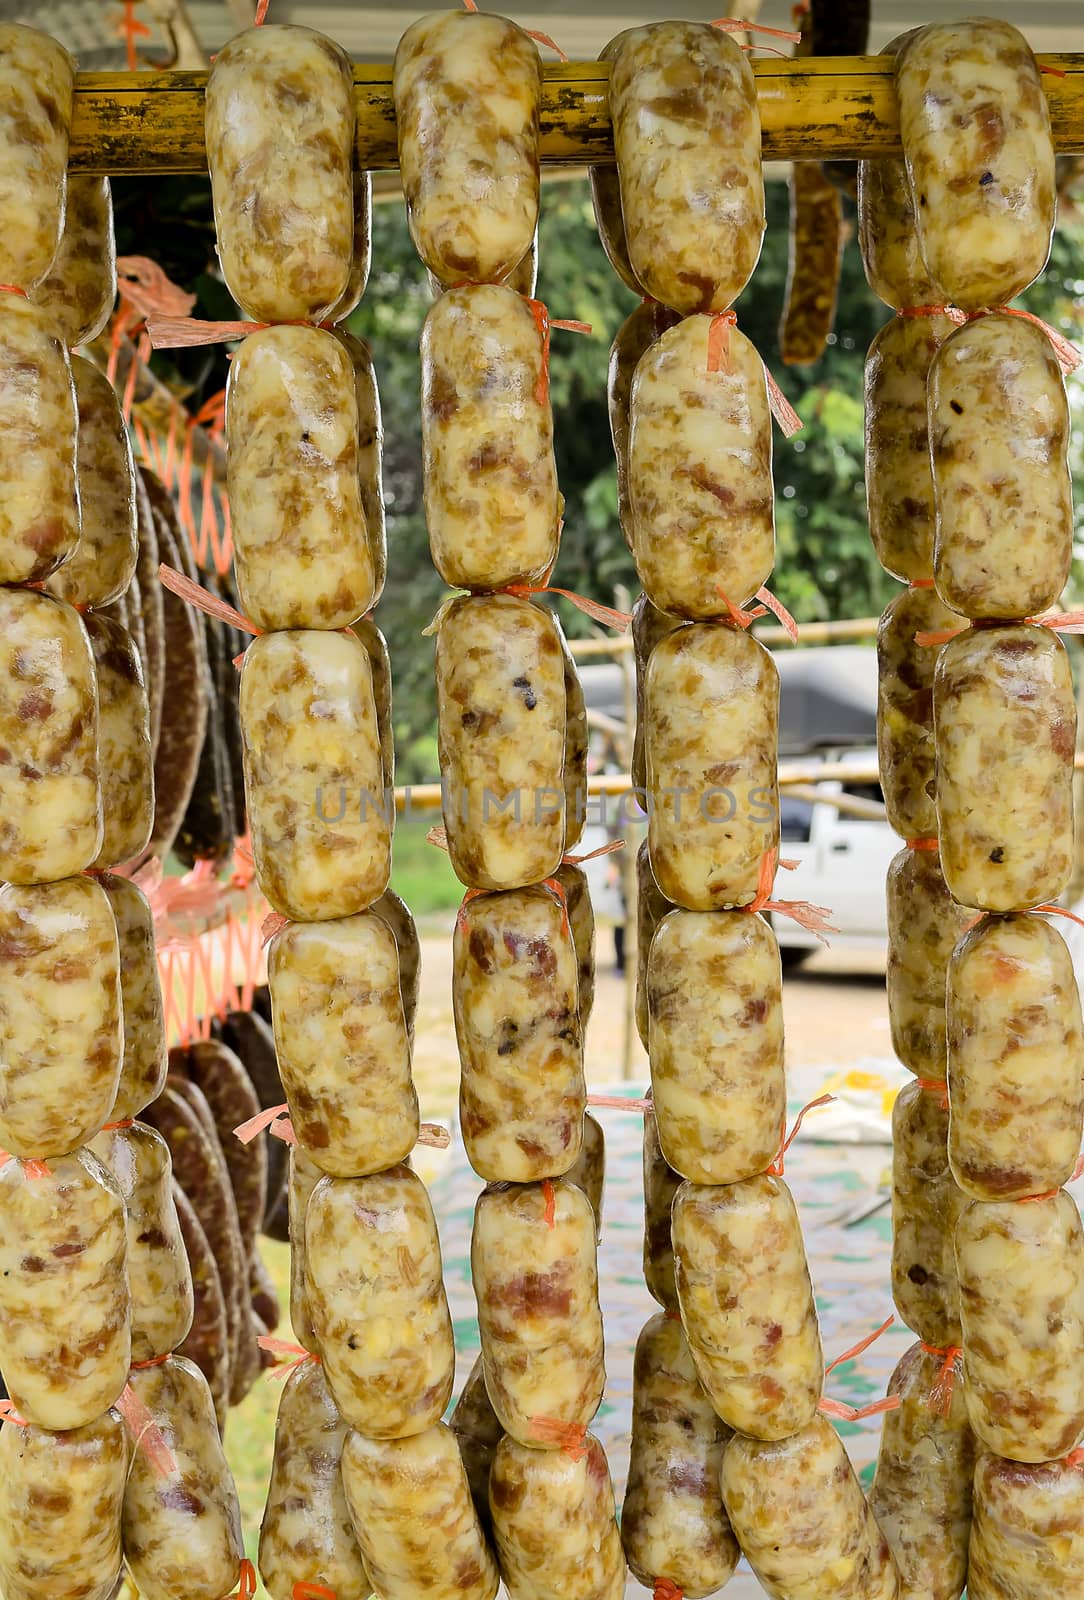 local Sausage Food Preservation in Northern East of Thailand by kobfujar